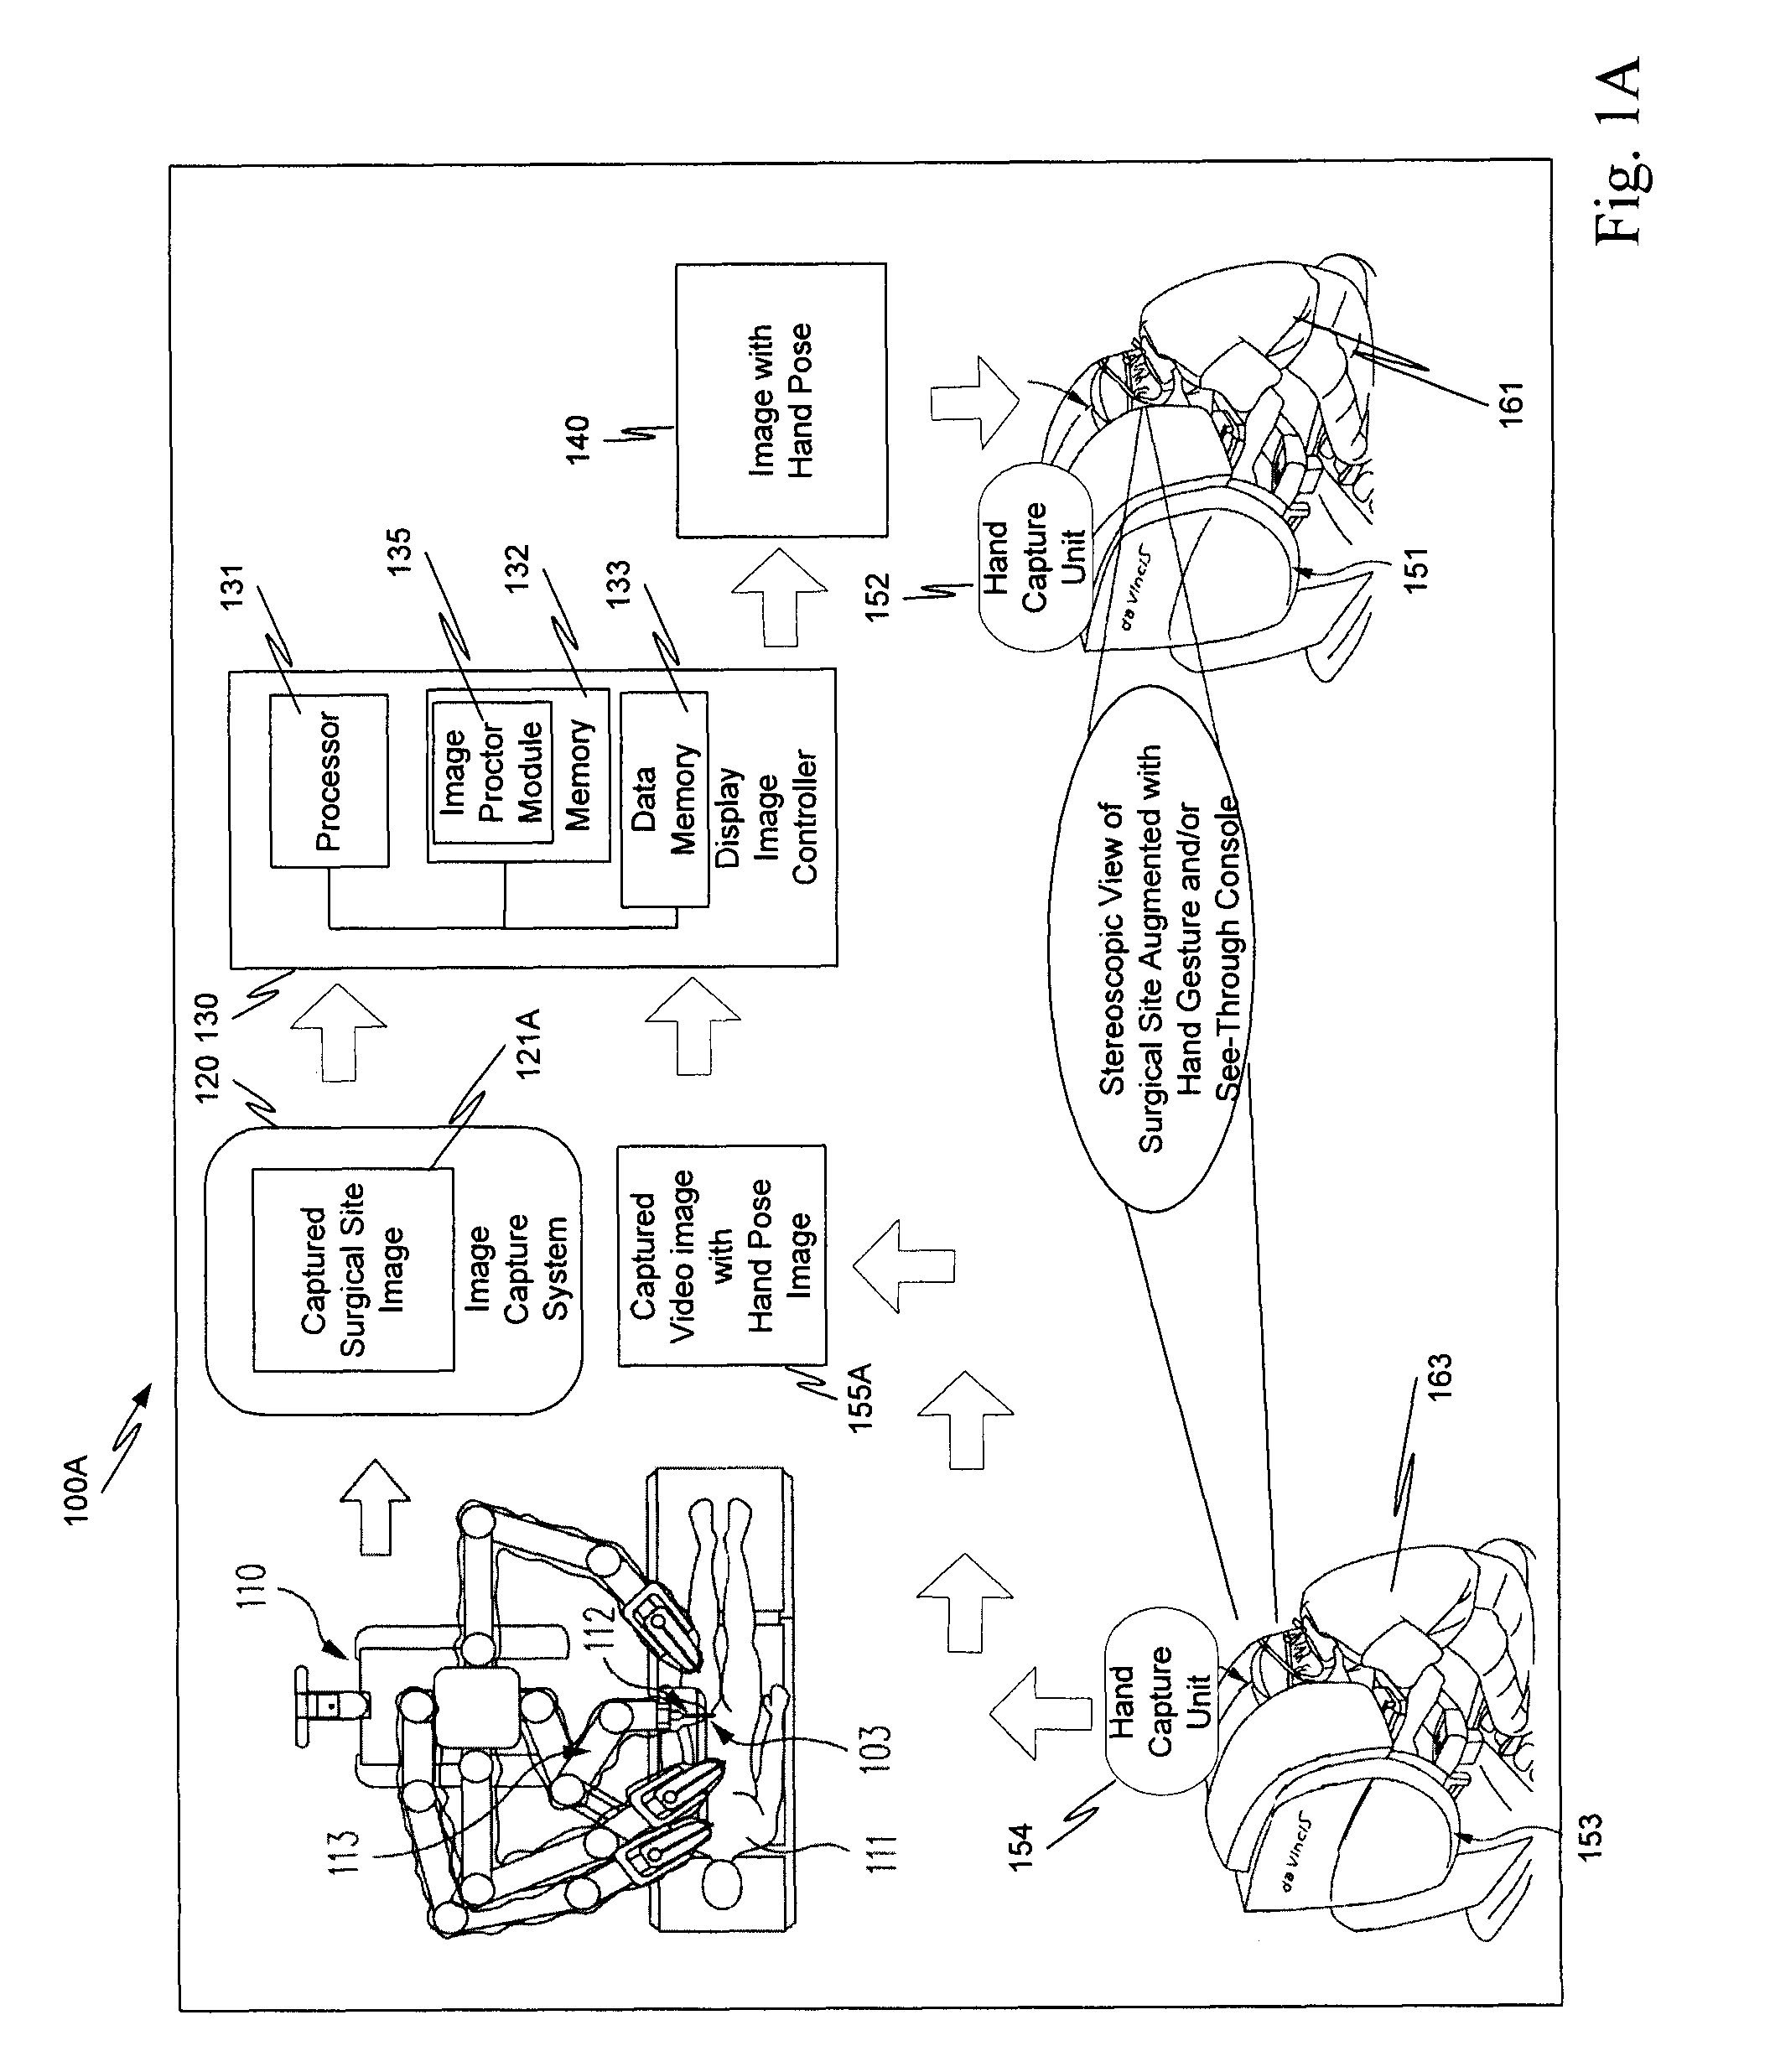 Method and system of see-through console overlay